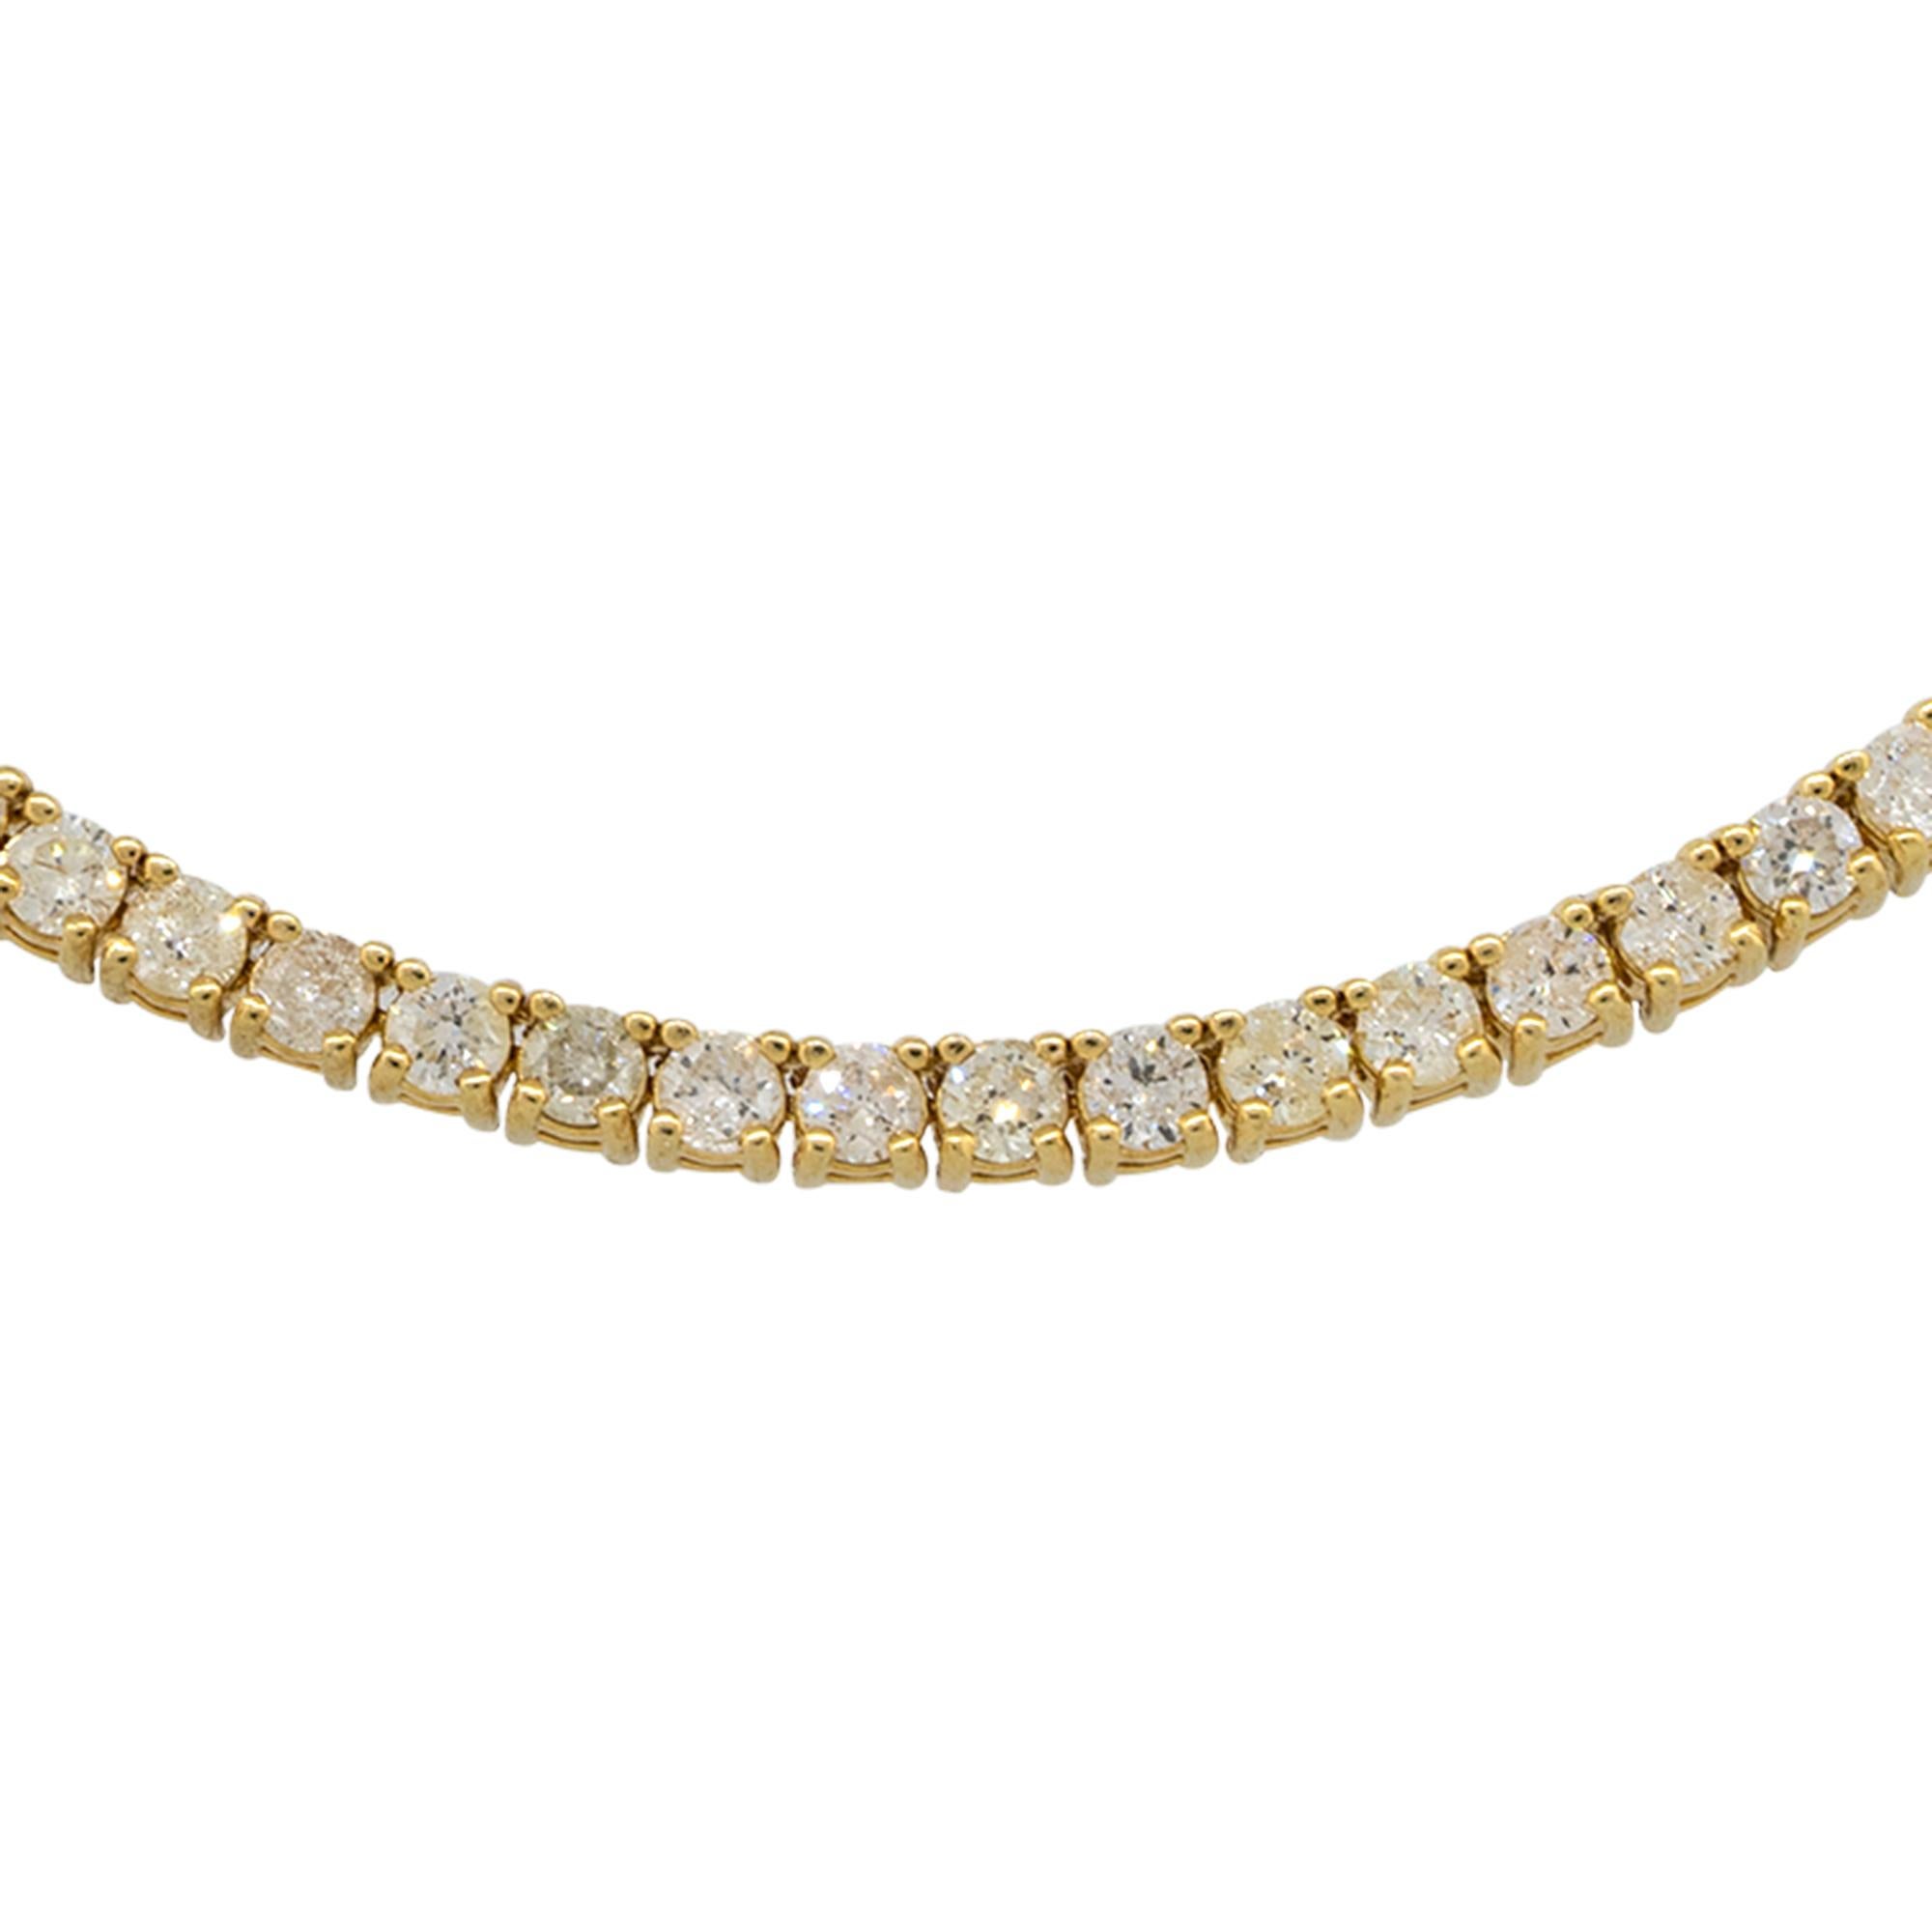 Material: 14k Yellow Gold
Diamond Details: Approx. 9.66ctw of round cut Diamonds. Diamonds are D in color and VS in clarity. 220 stones 
Measurements: Necklace measures 22